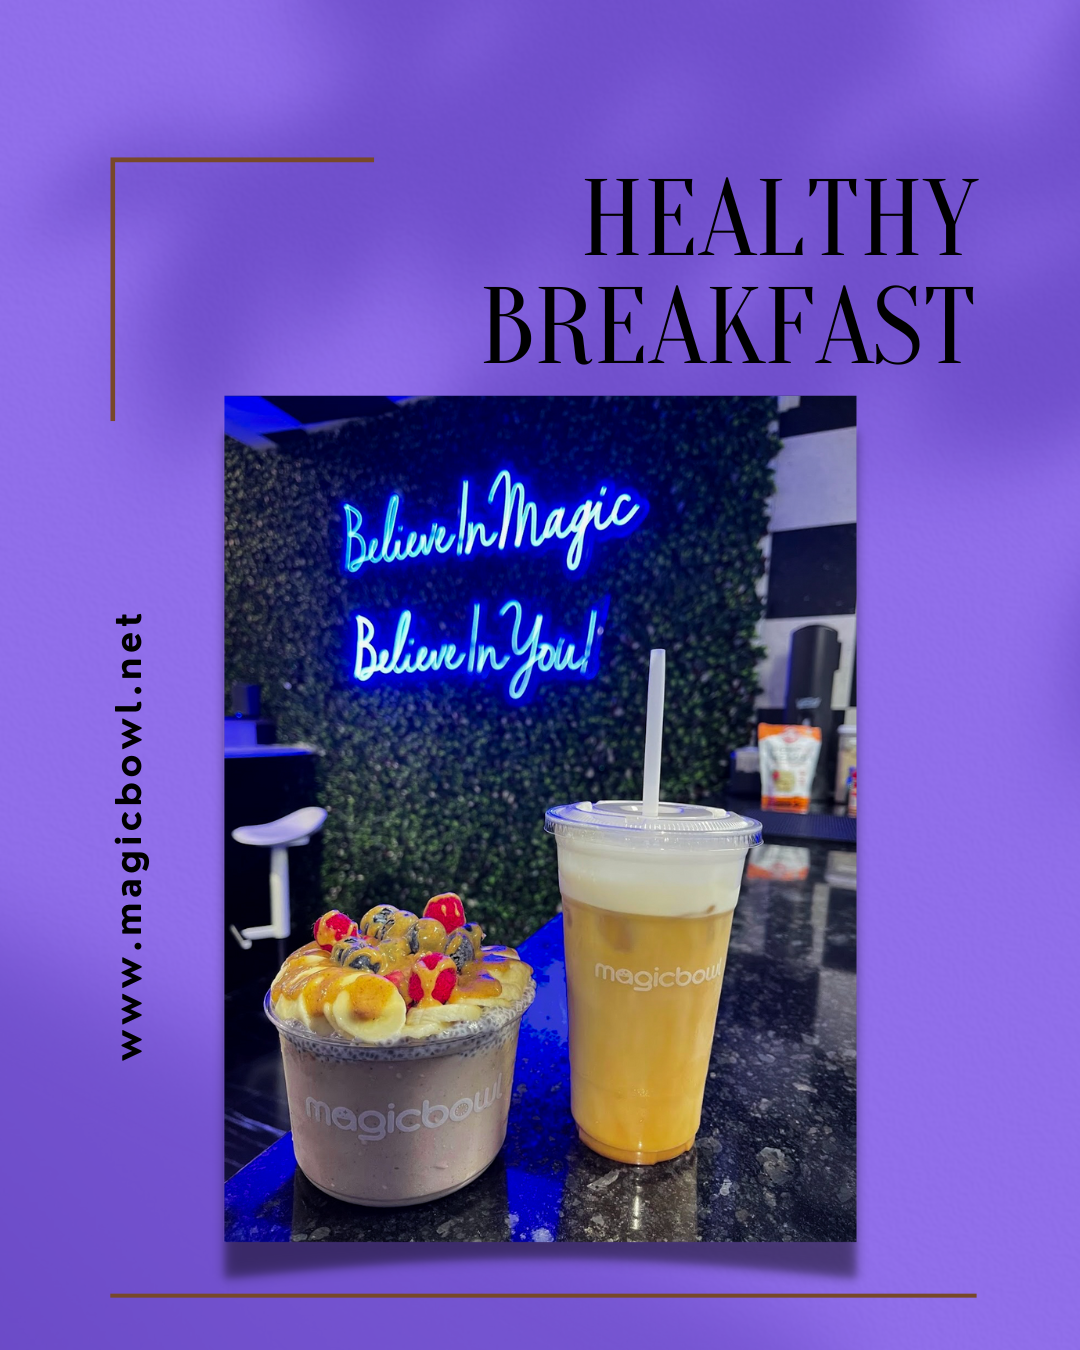 You are currently viewing The Magic of Healthy Breakfast: Nourish Your Day with Acai Bowls and Smoothies at Magic Bowl in Quincy, MA